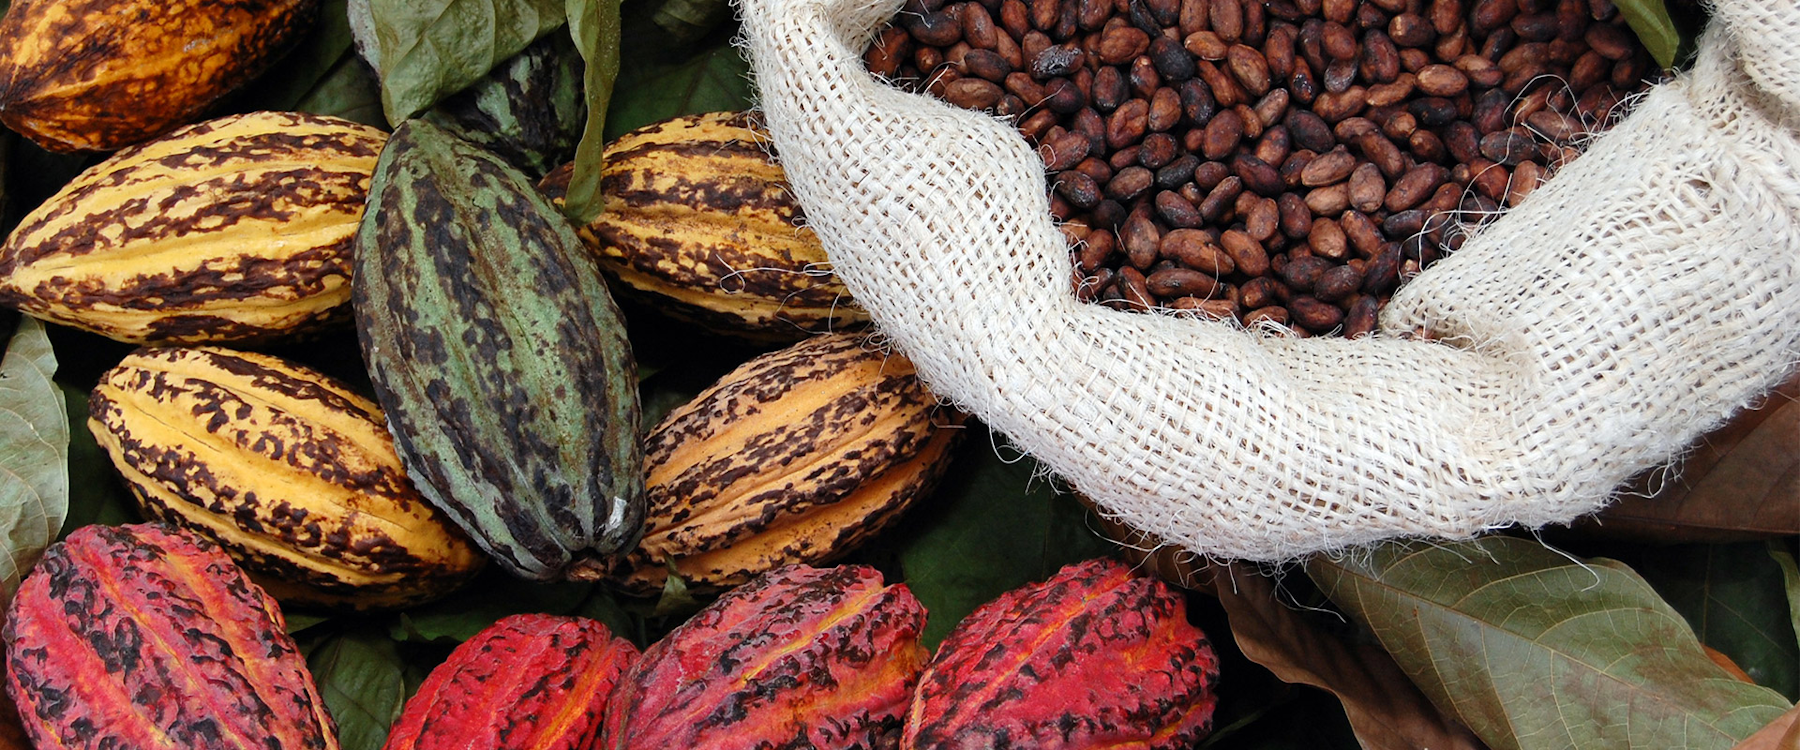 The Verse Chocolate brand design image of cacao pods and a bag of beans.